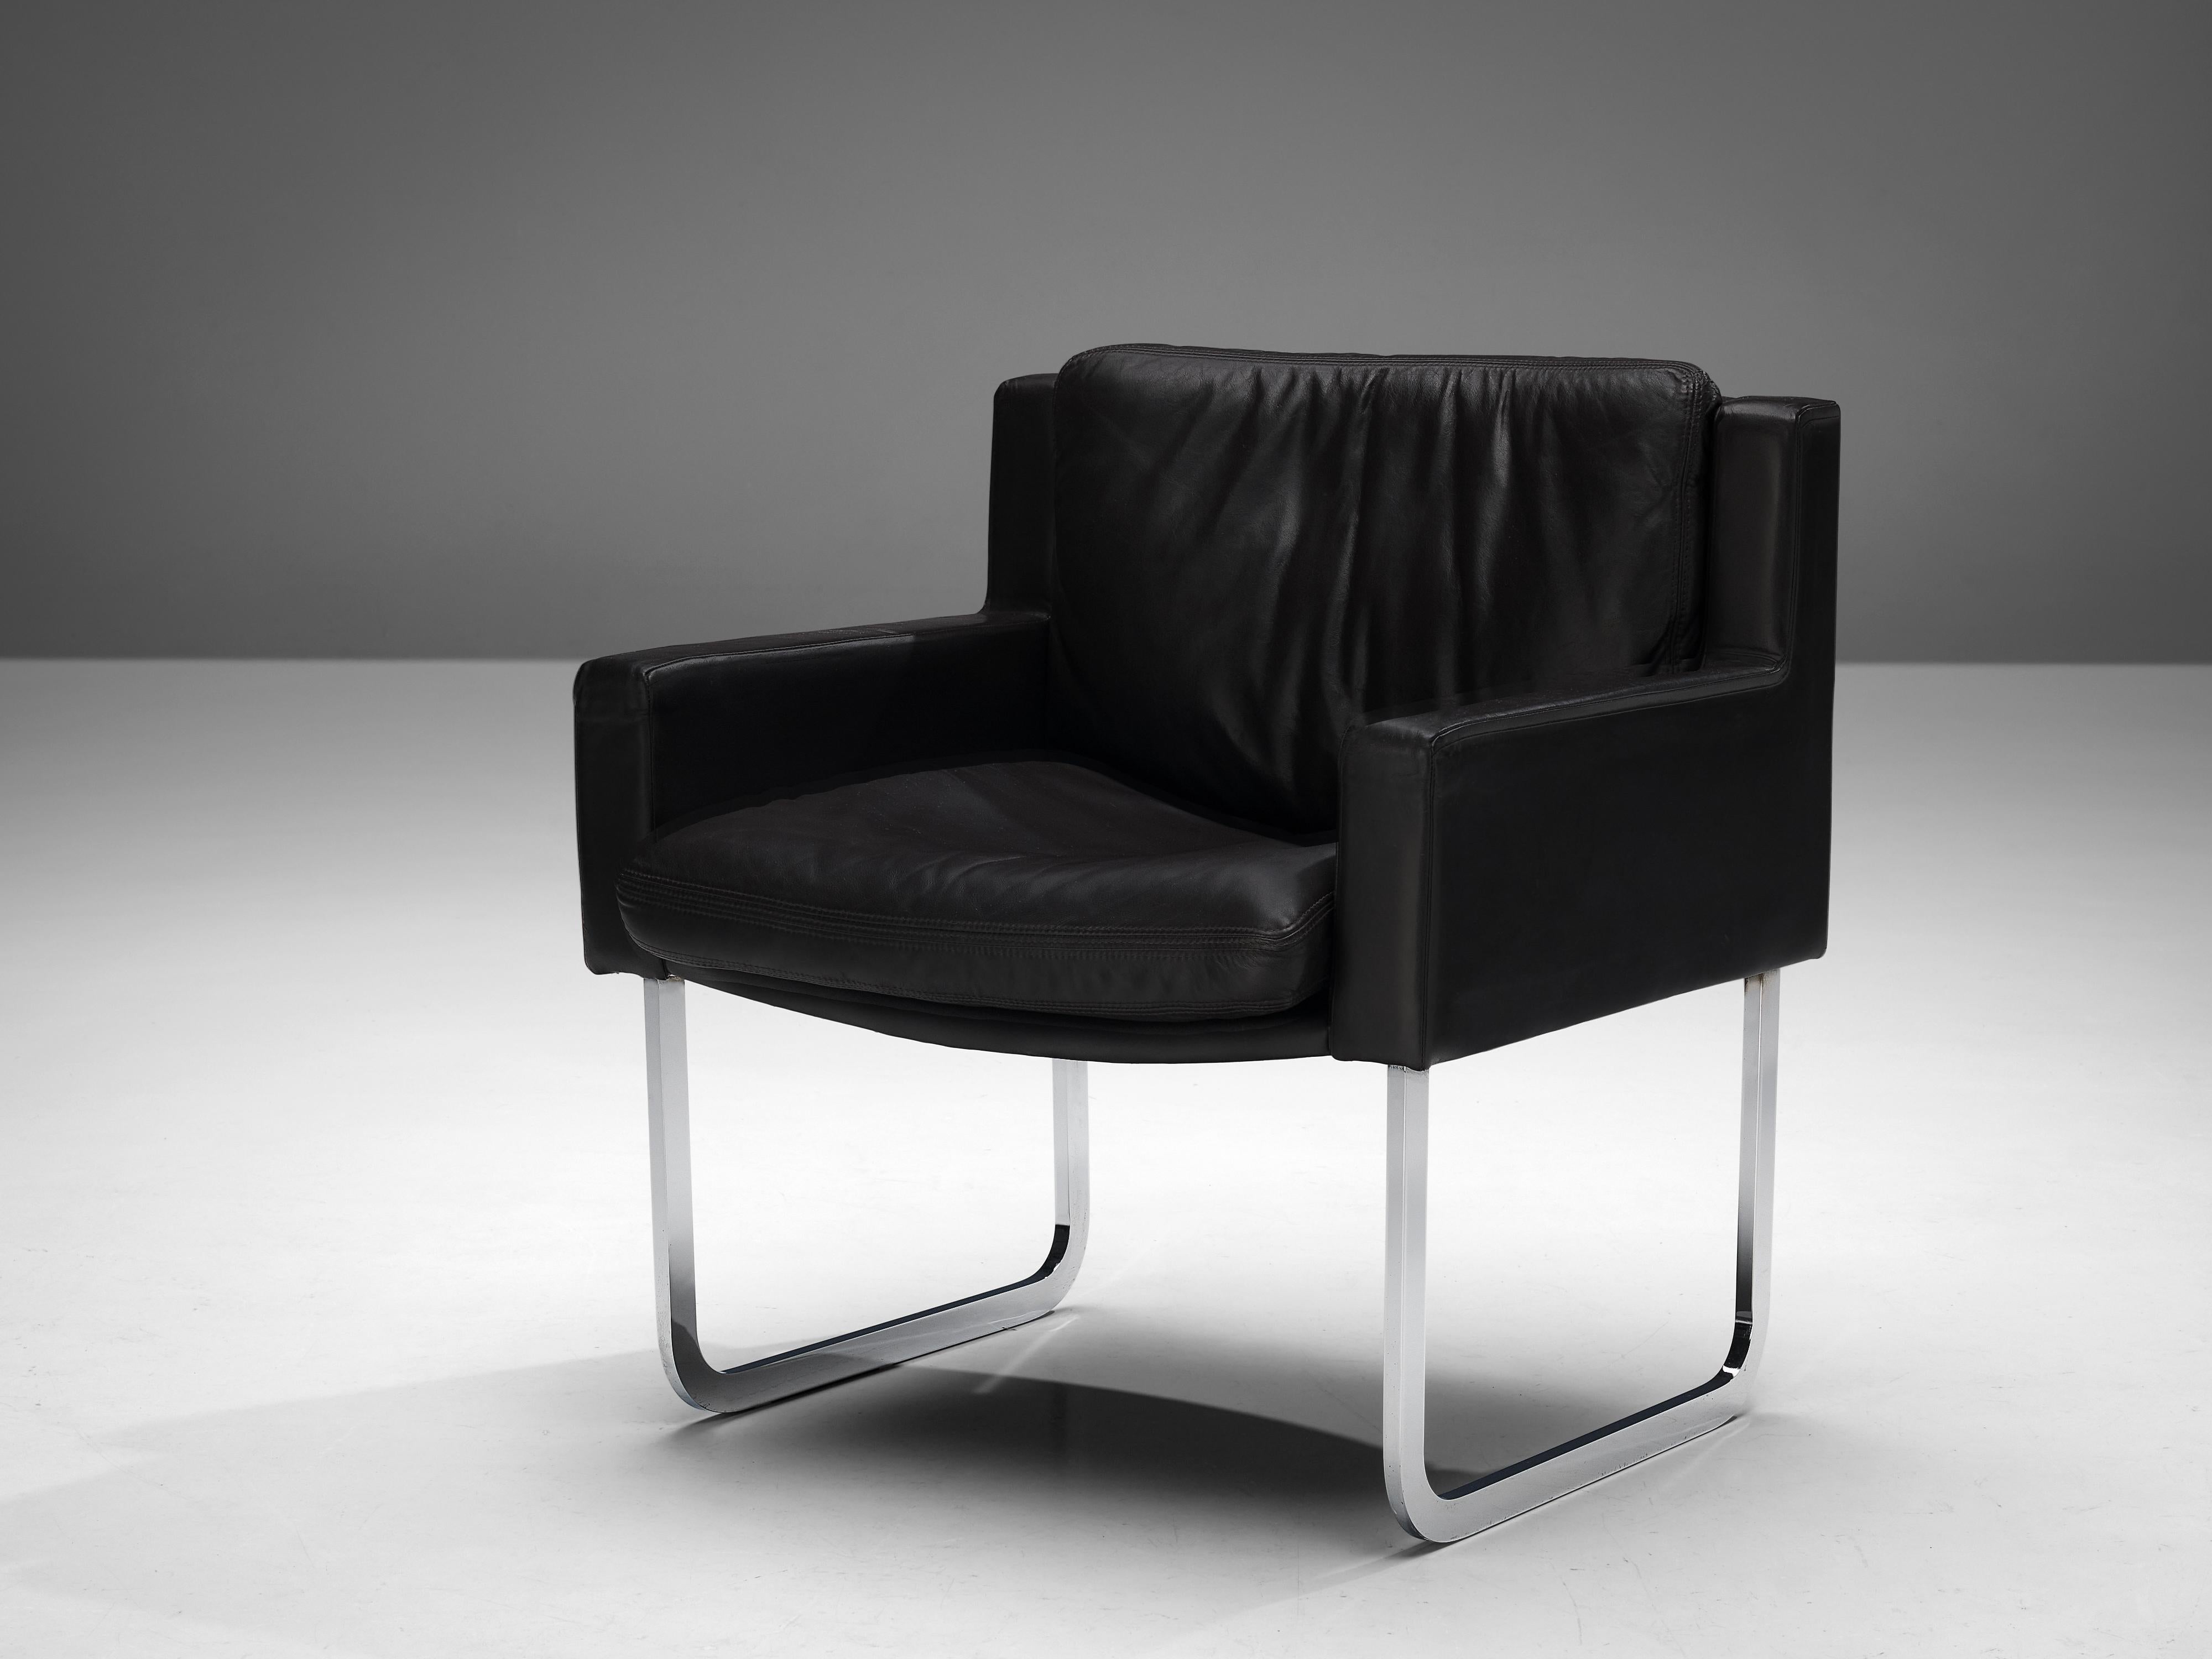 Lounge chair, leather, metal, Europe, 1980s

This comfortable lounge chair lays full focus on strong lines and the combination of two materials. Upholstered in dark brown leather and resting on two u-shaped legs in chrome, the chair convinces with